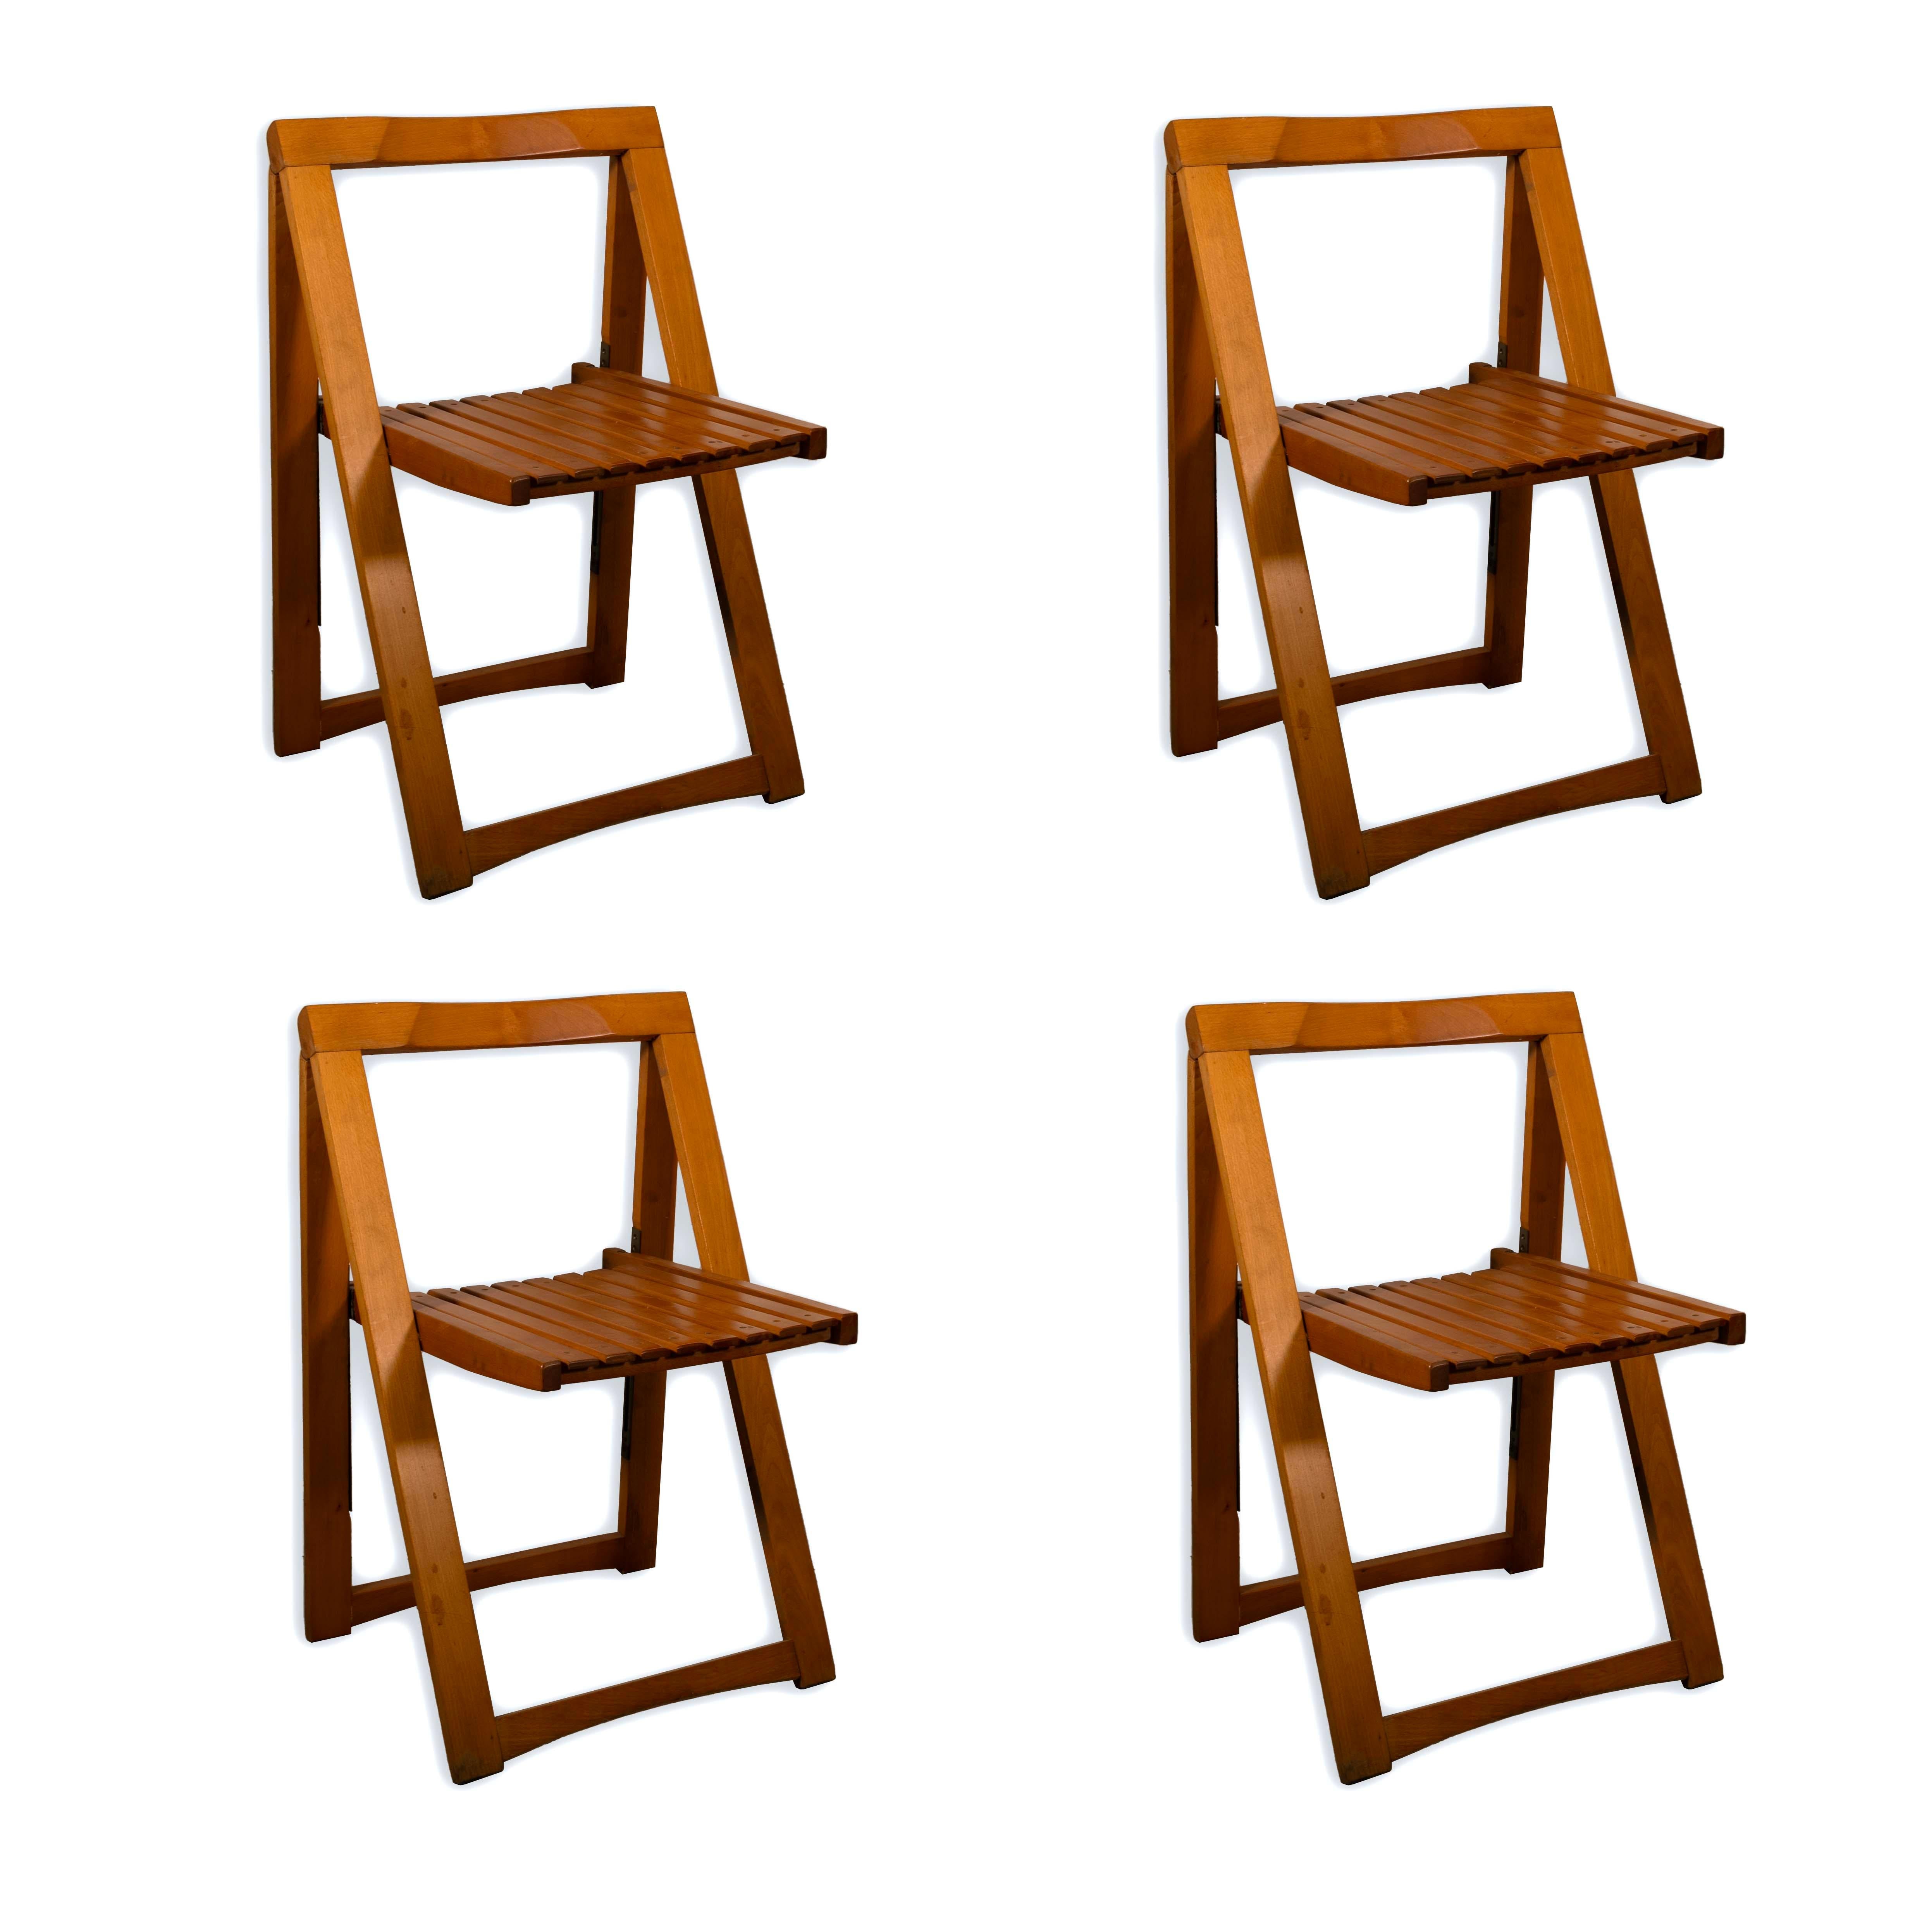 This set of 4 Trieste 1960s Aldo Jacober Folding Chairs are the perfect addition to your mid century modern collection. Stunningly crafted, these Italian made chairs are both comfortable and ready to place wherever your heart desires due to their